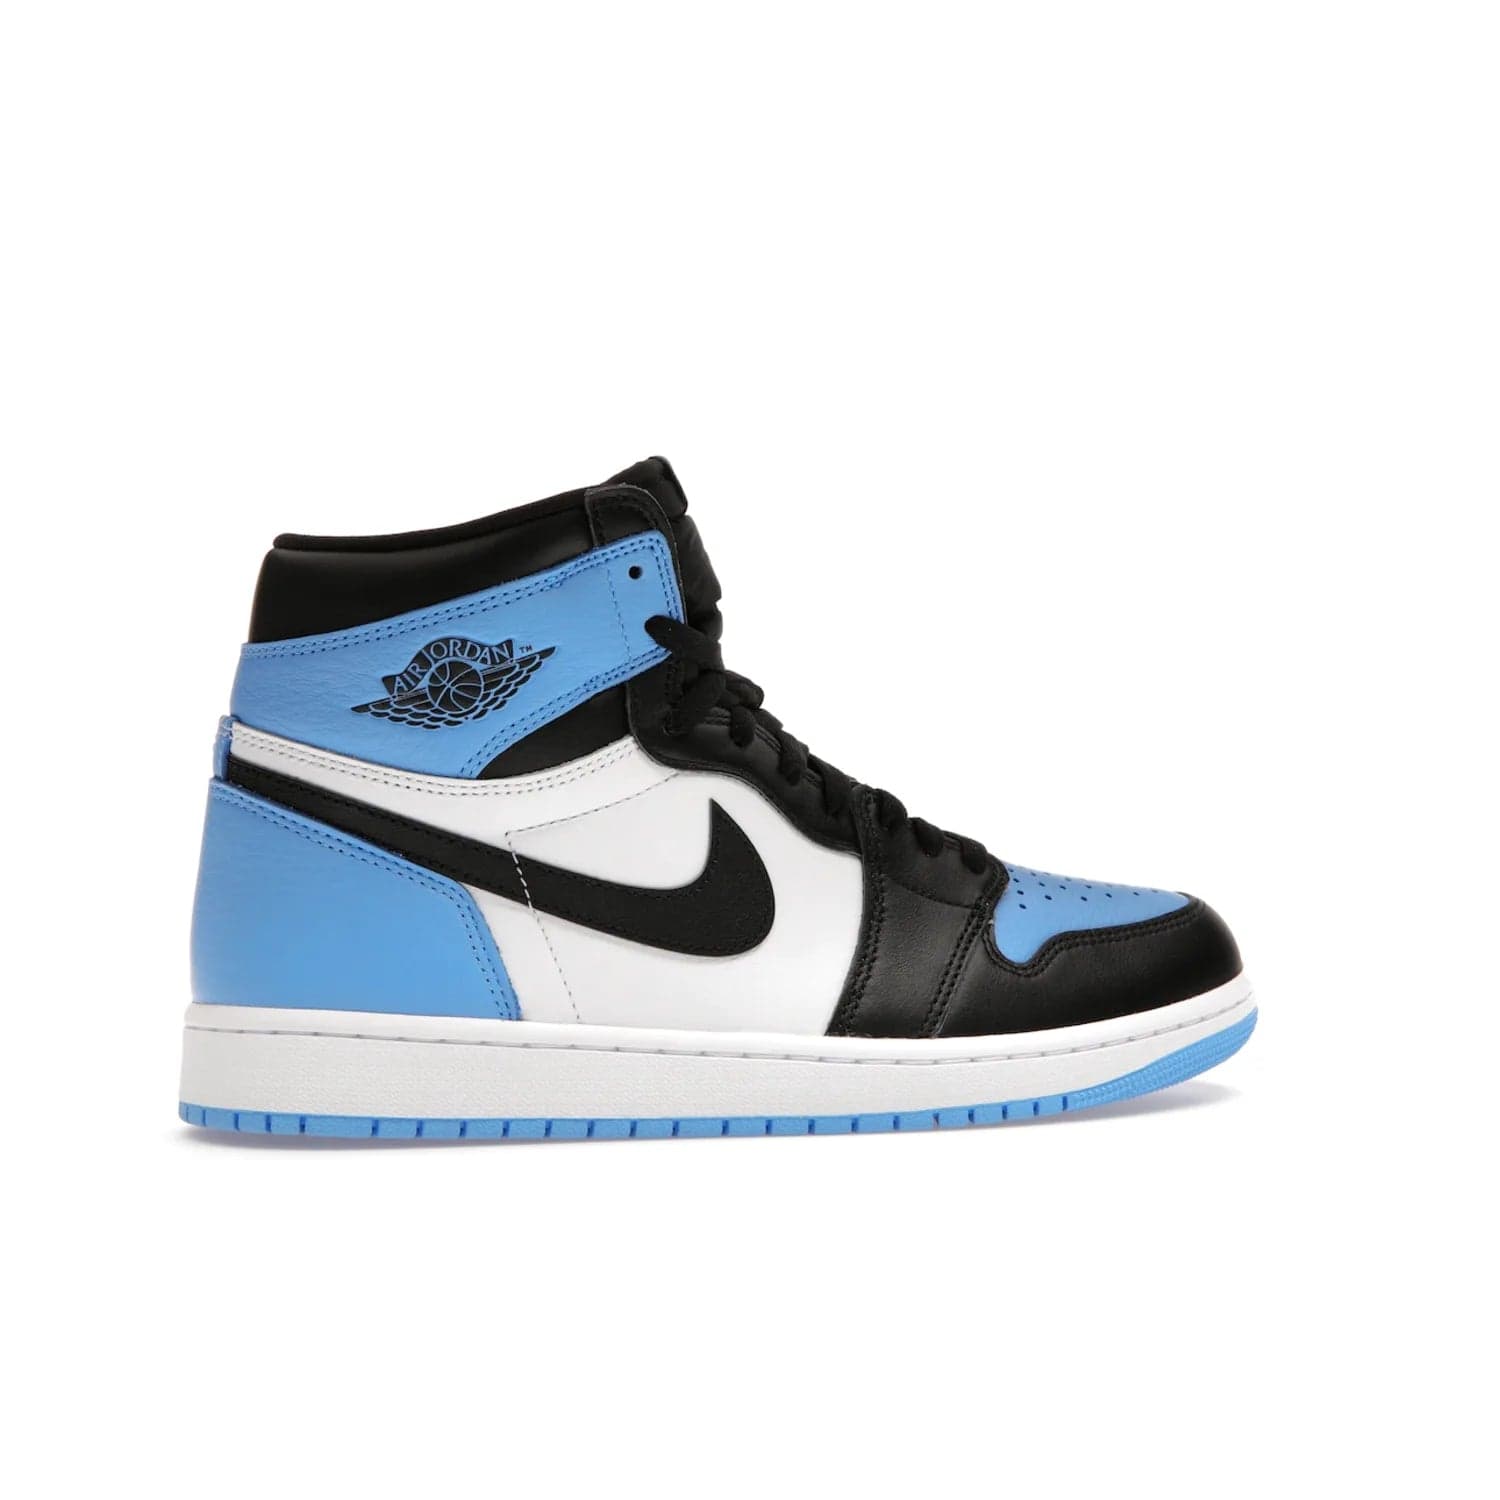 Jordan 1 Retro High OG UNC Toe - Image 35 - Only at www.BallersClubKickz.com - Jordan 1 High OG UNC Toe is a fashionable, high-quality sneaker featuring University Blue, Black White and White. Releasing July 22, 2023, it's the perfect pick up for sneakerheads.